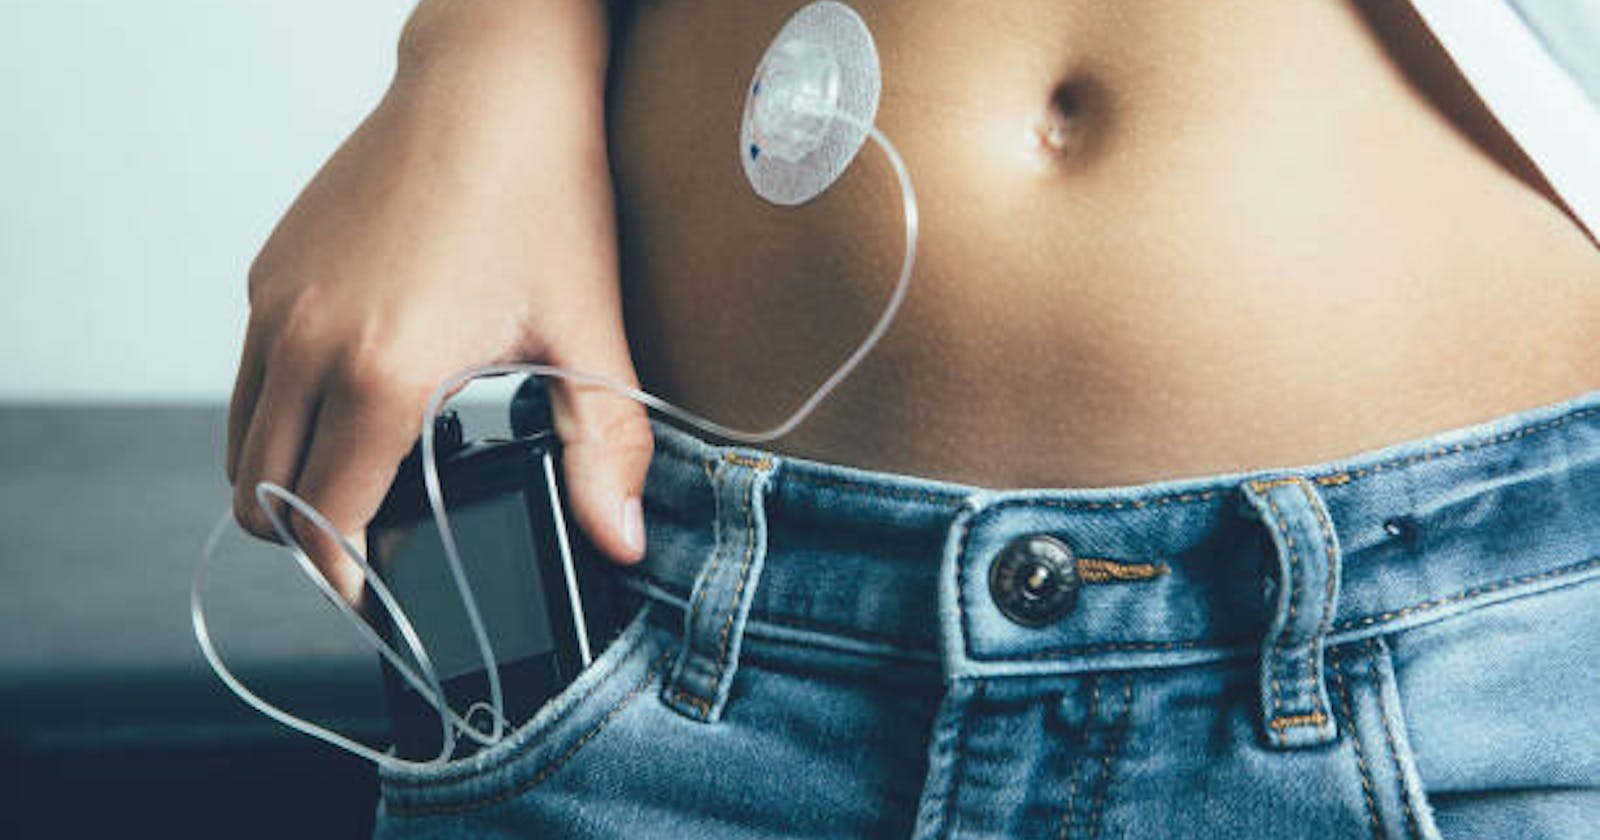 United States Insulin Pumps Market 2027: Overview, Analysis, Growth, Scope and Key Players